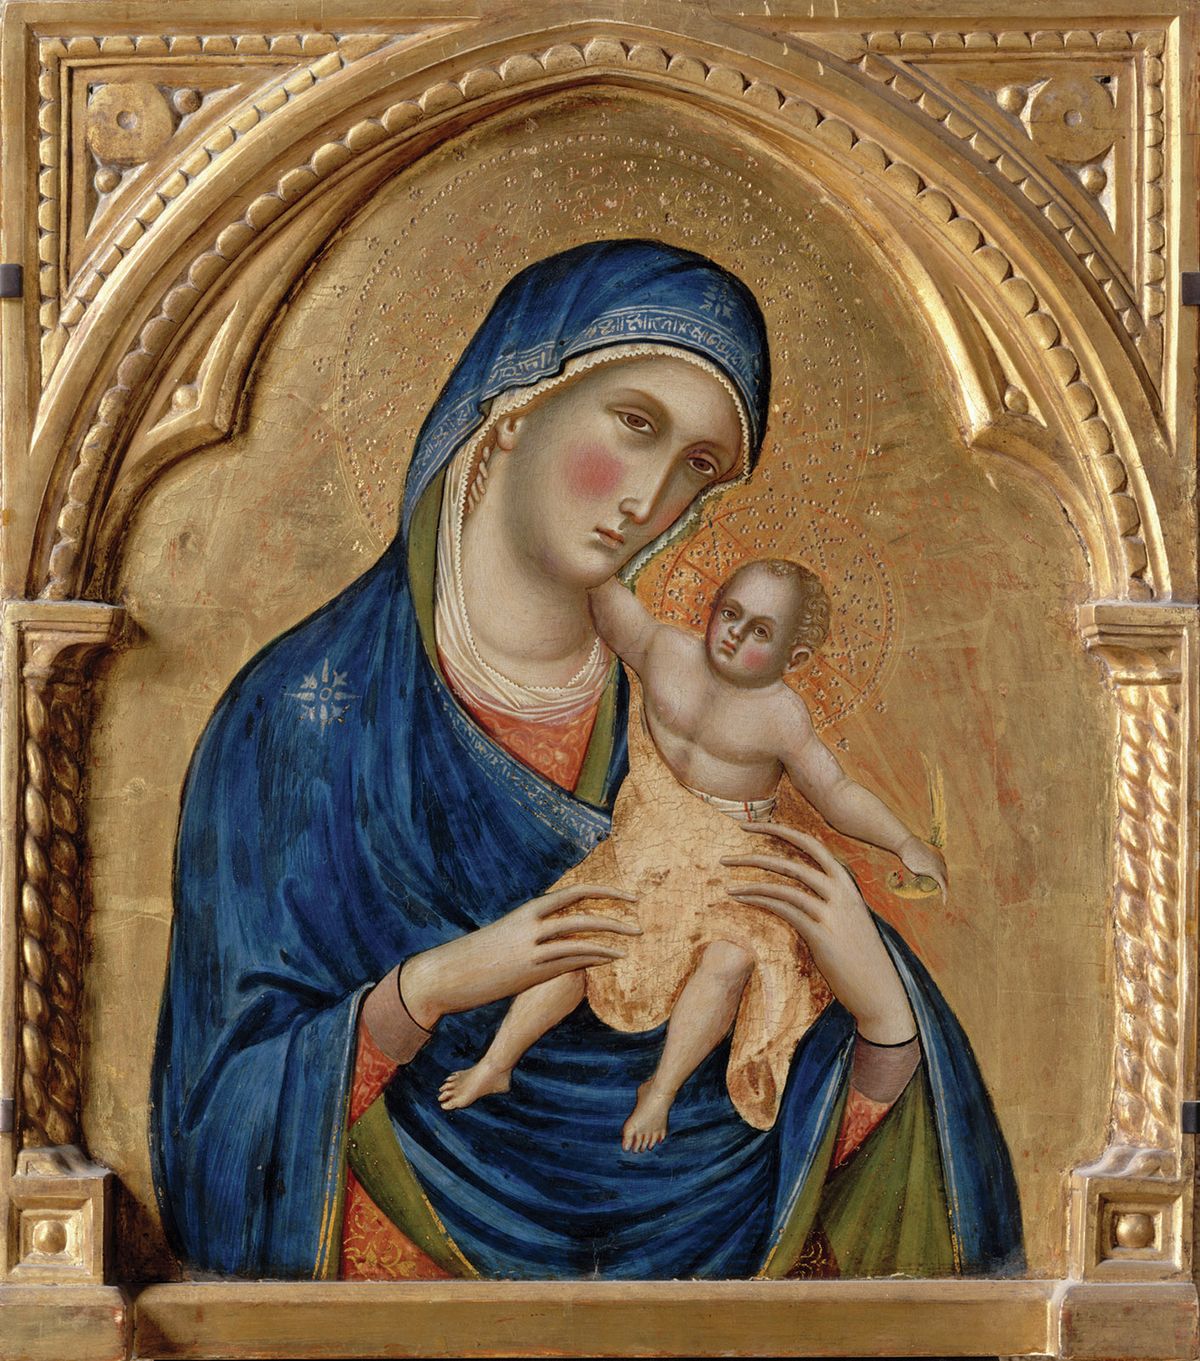 Veneziano’s Virgin and Child (around 1340-50) was thought to be the central panel of the Worcester triptych but new research suggests it is too large Photo: René-Gabriel Ojéda; © RMN-Grand Palais/Art Resource, NY